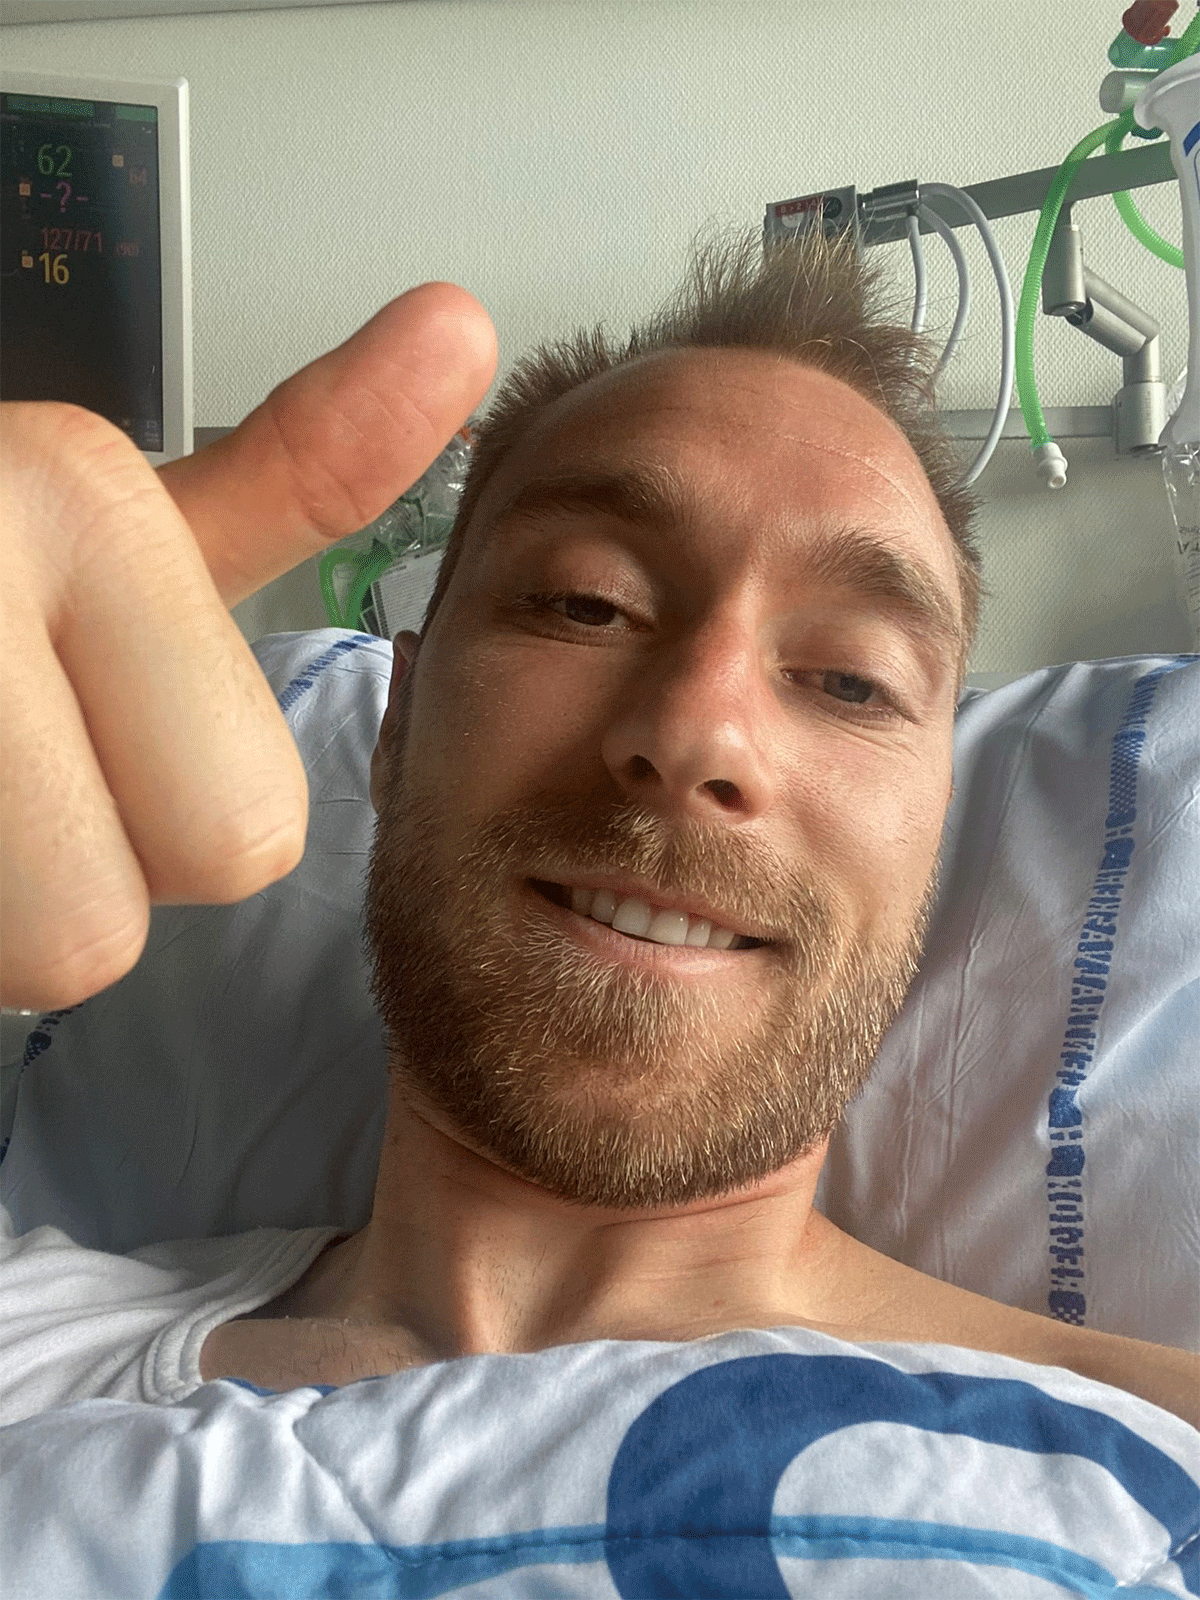 Christian Eriksen gives a thumbs up from his hospital bed 